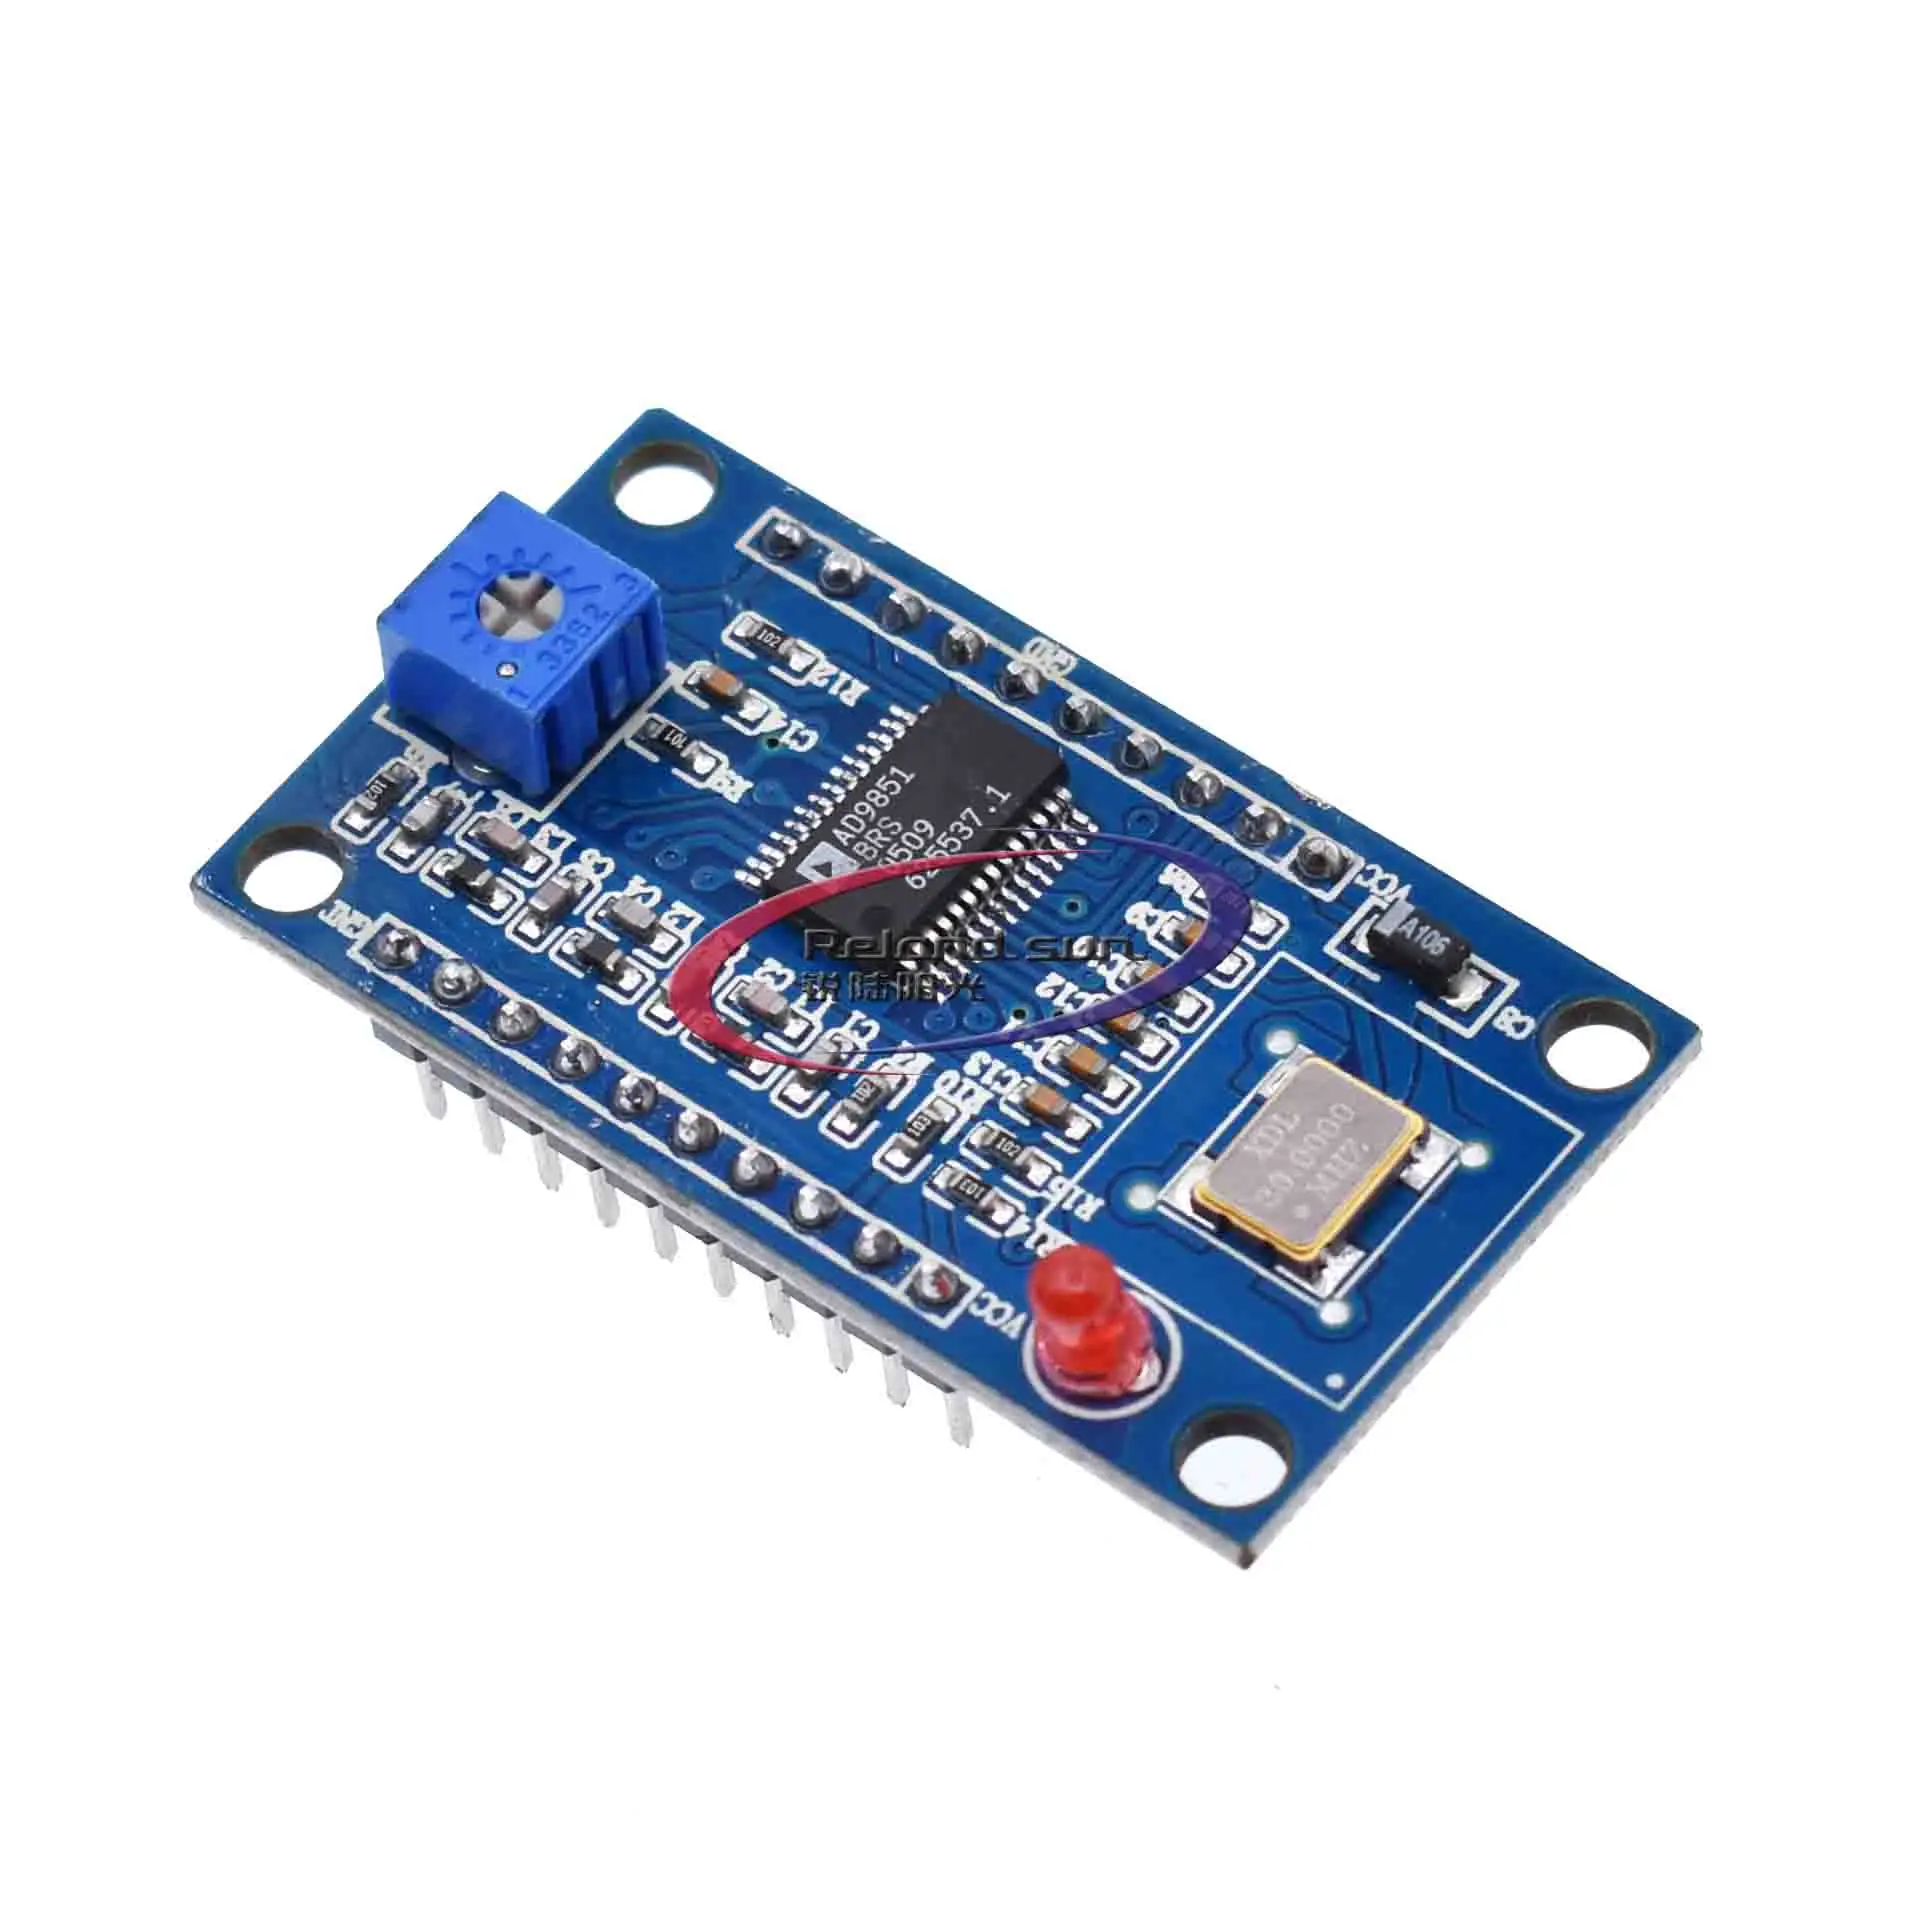 Cvmnkljfge AD9851 DDS Signal Generator Module 2 Sin Wave 0-70MHz for Arduino  Starter  Kit 0-1MHz and 2 Square Wave